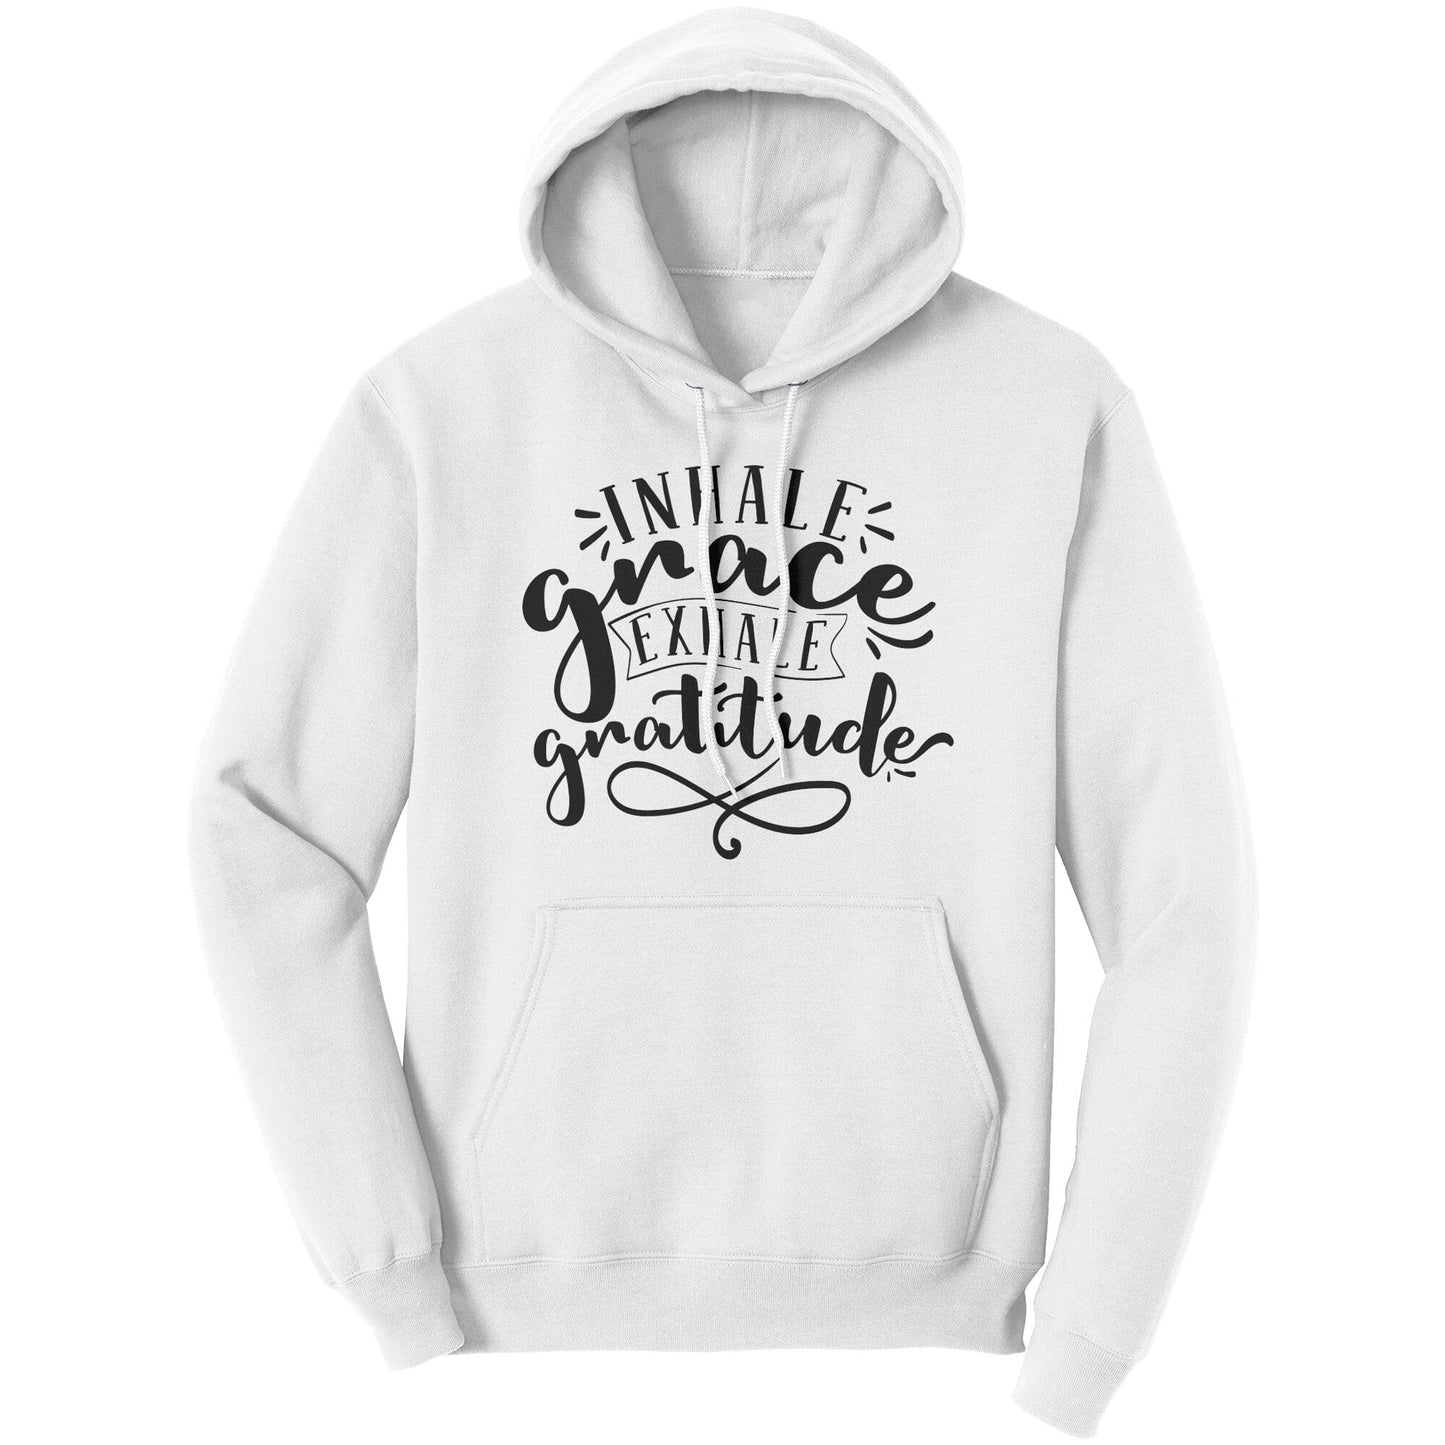 Uniquely You Graphic Hoodie Sweatshirt, Inhale Grace Exhale Gratitude Hooded Shirt - Scarvesnthangs